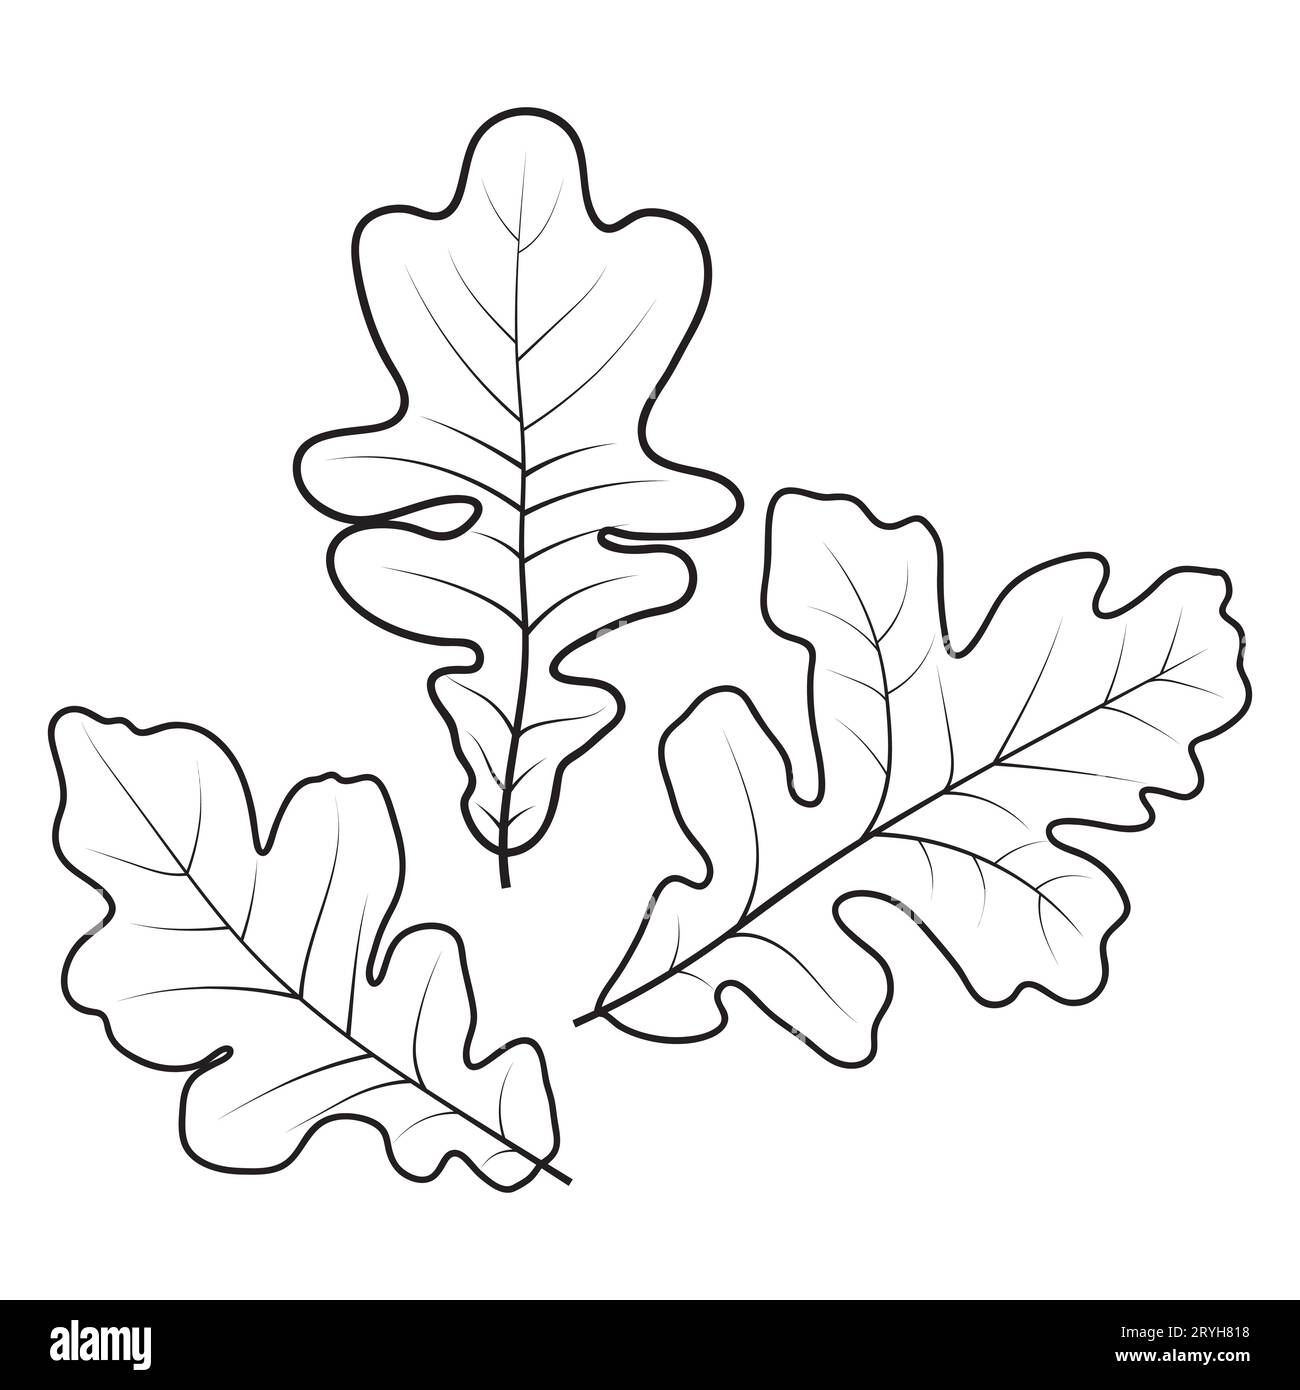 White oak tree leaves, vector illustration isolated on white background. Oak leaf outlines, coloring page. Stock Vector